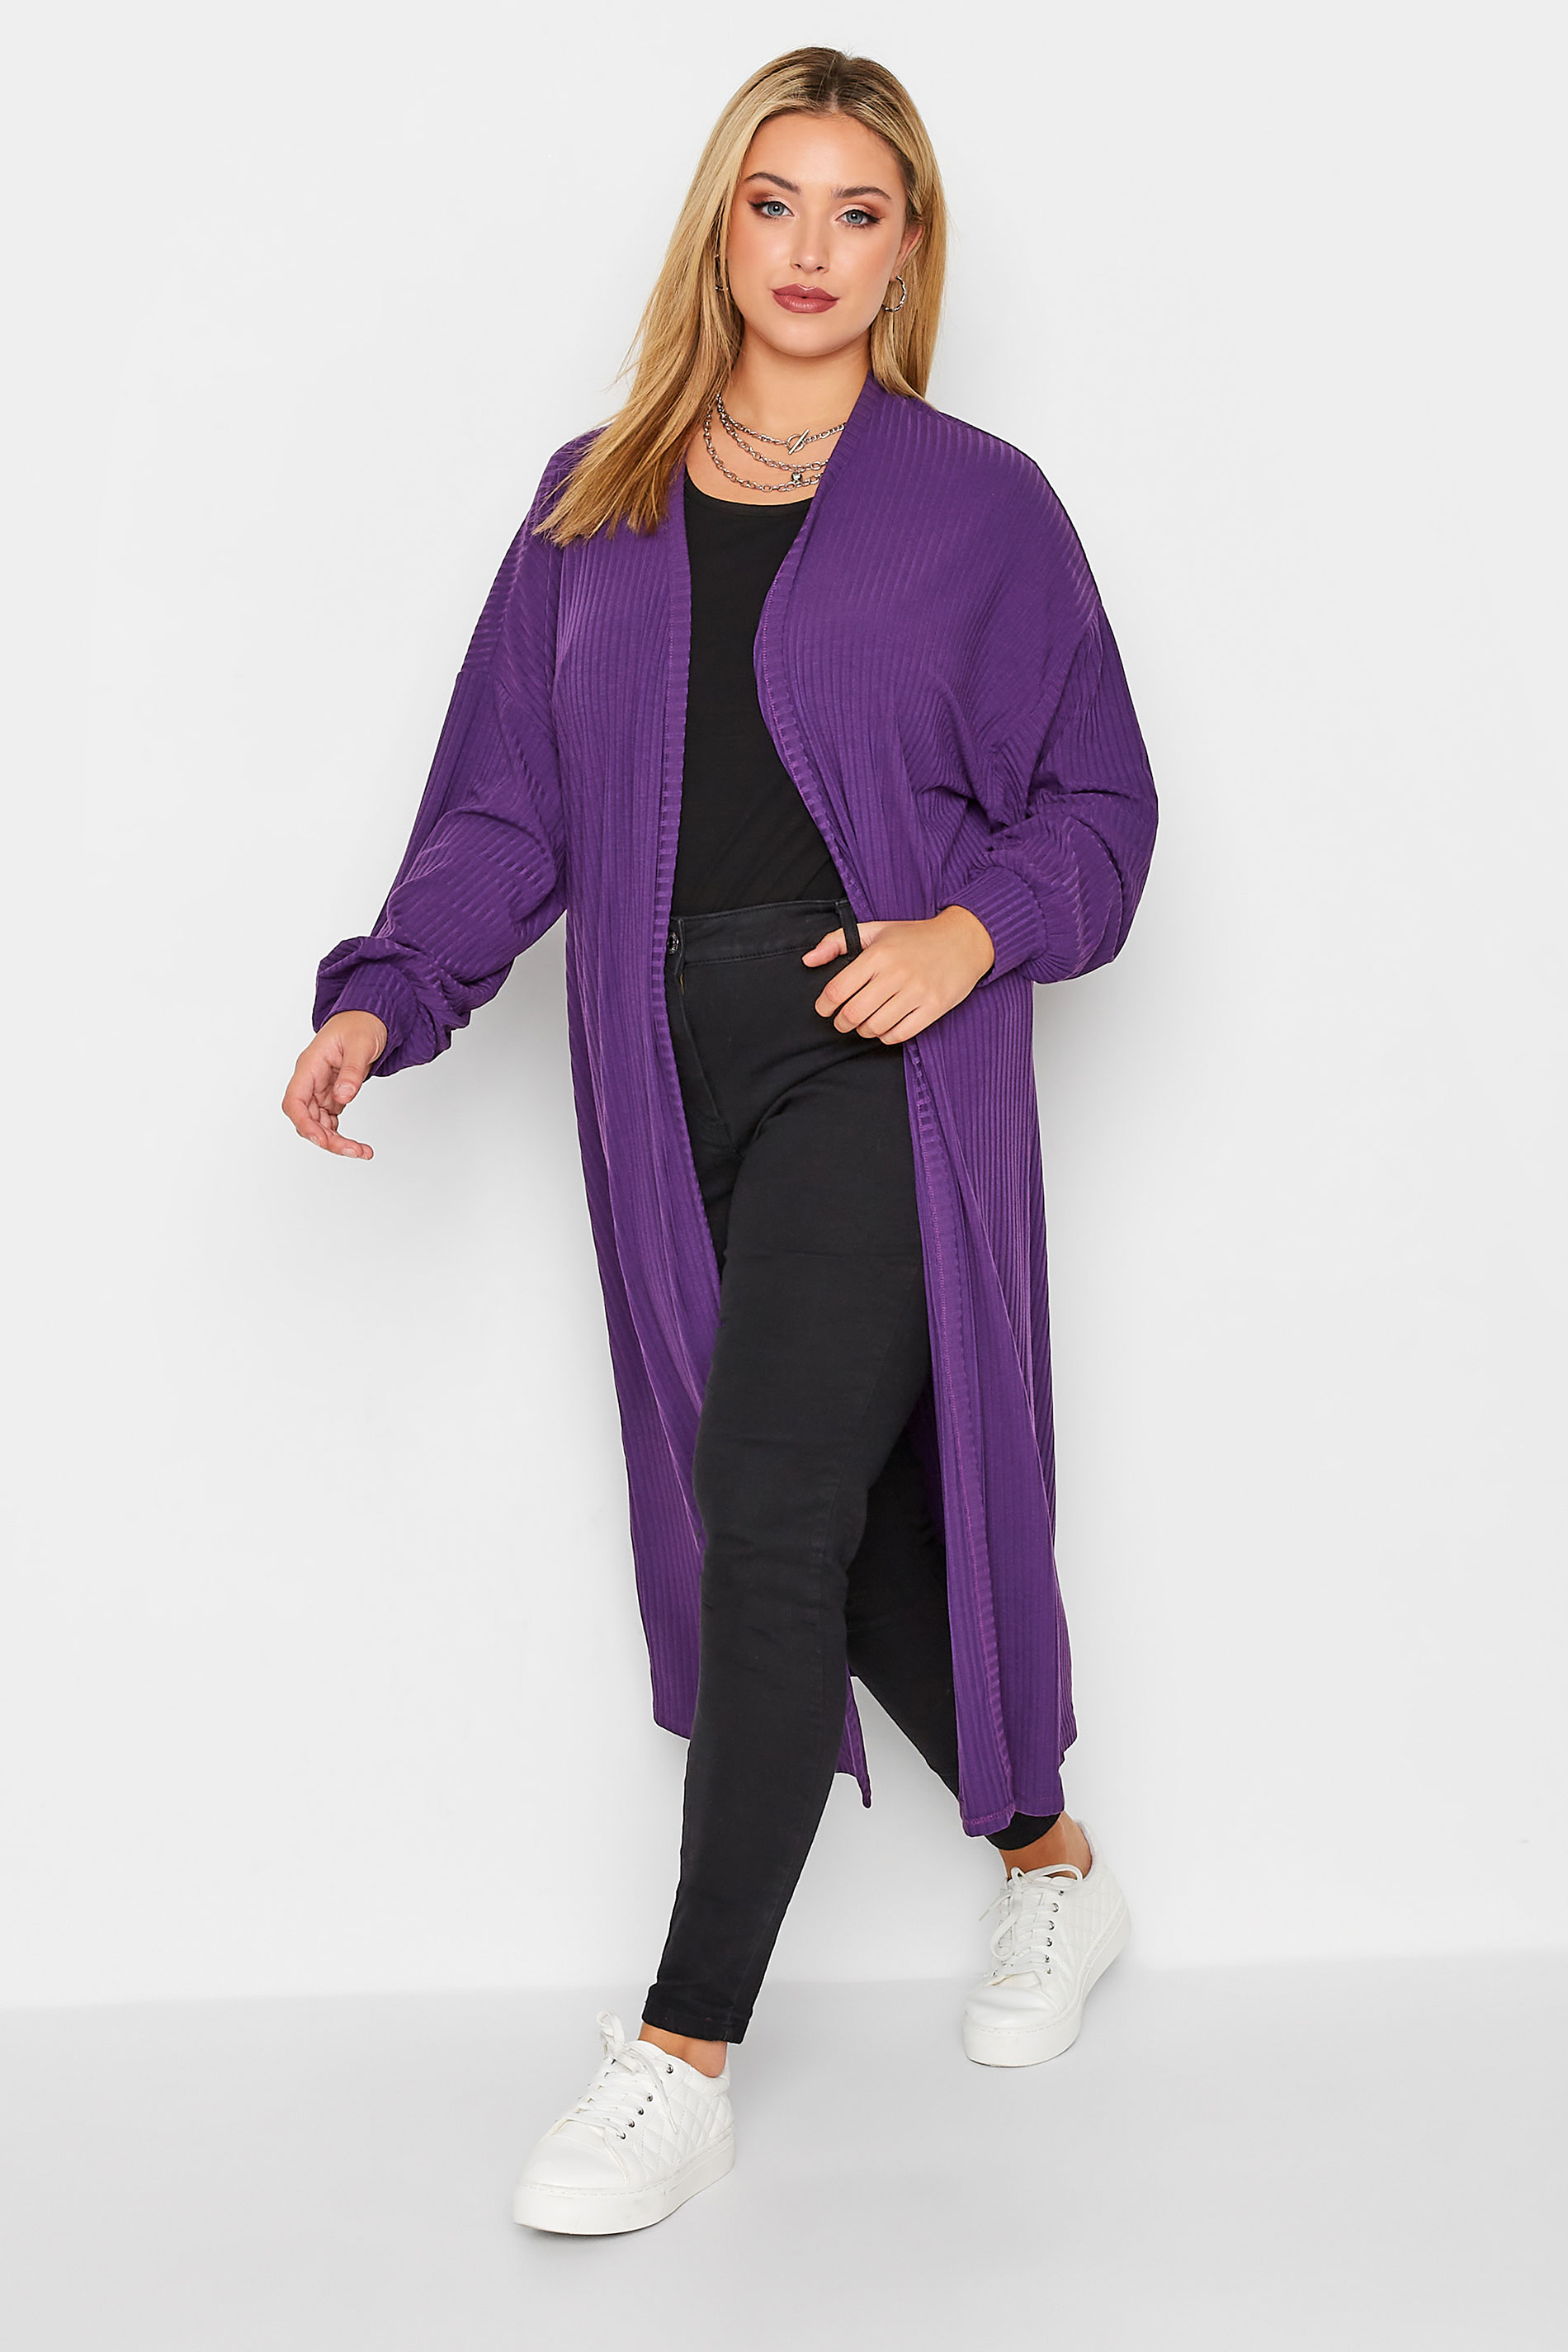 Plus Size LIMITED COLLECTION Plum Purple Ribbed Maxi Cardigan | Yours Clothing 1